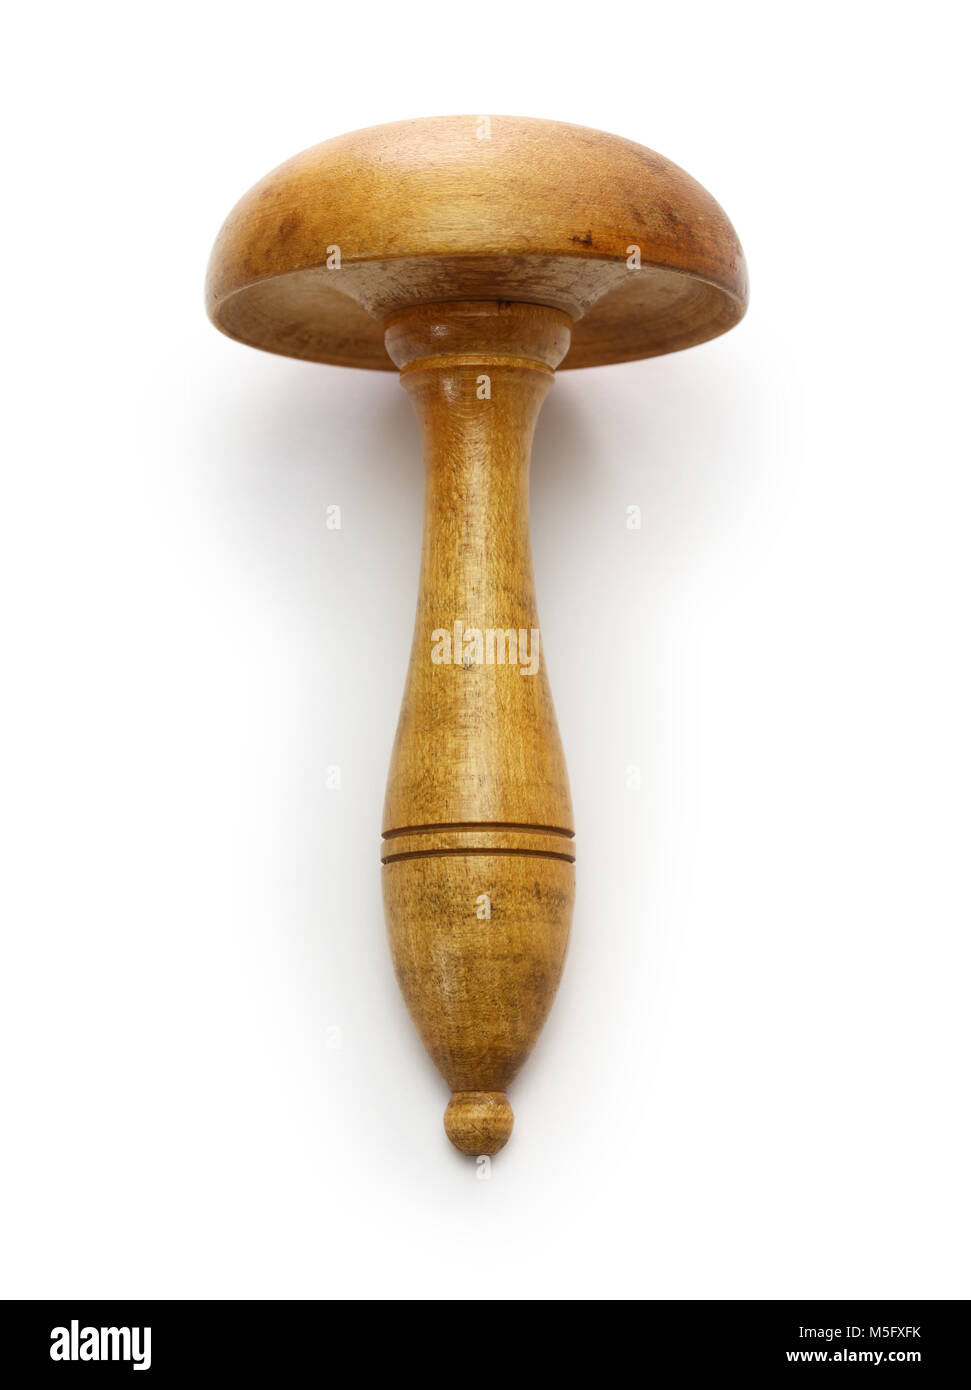 darning mushroom, vintage tool of repairing holes in fabric or knitting  isolated on white background Stock Photo - Alamy